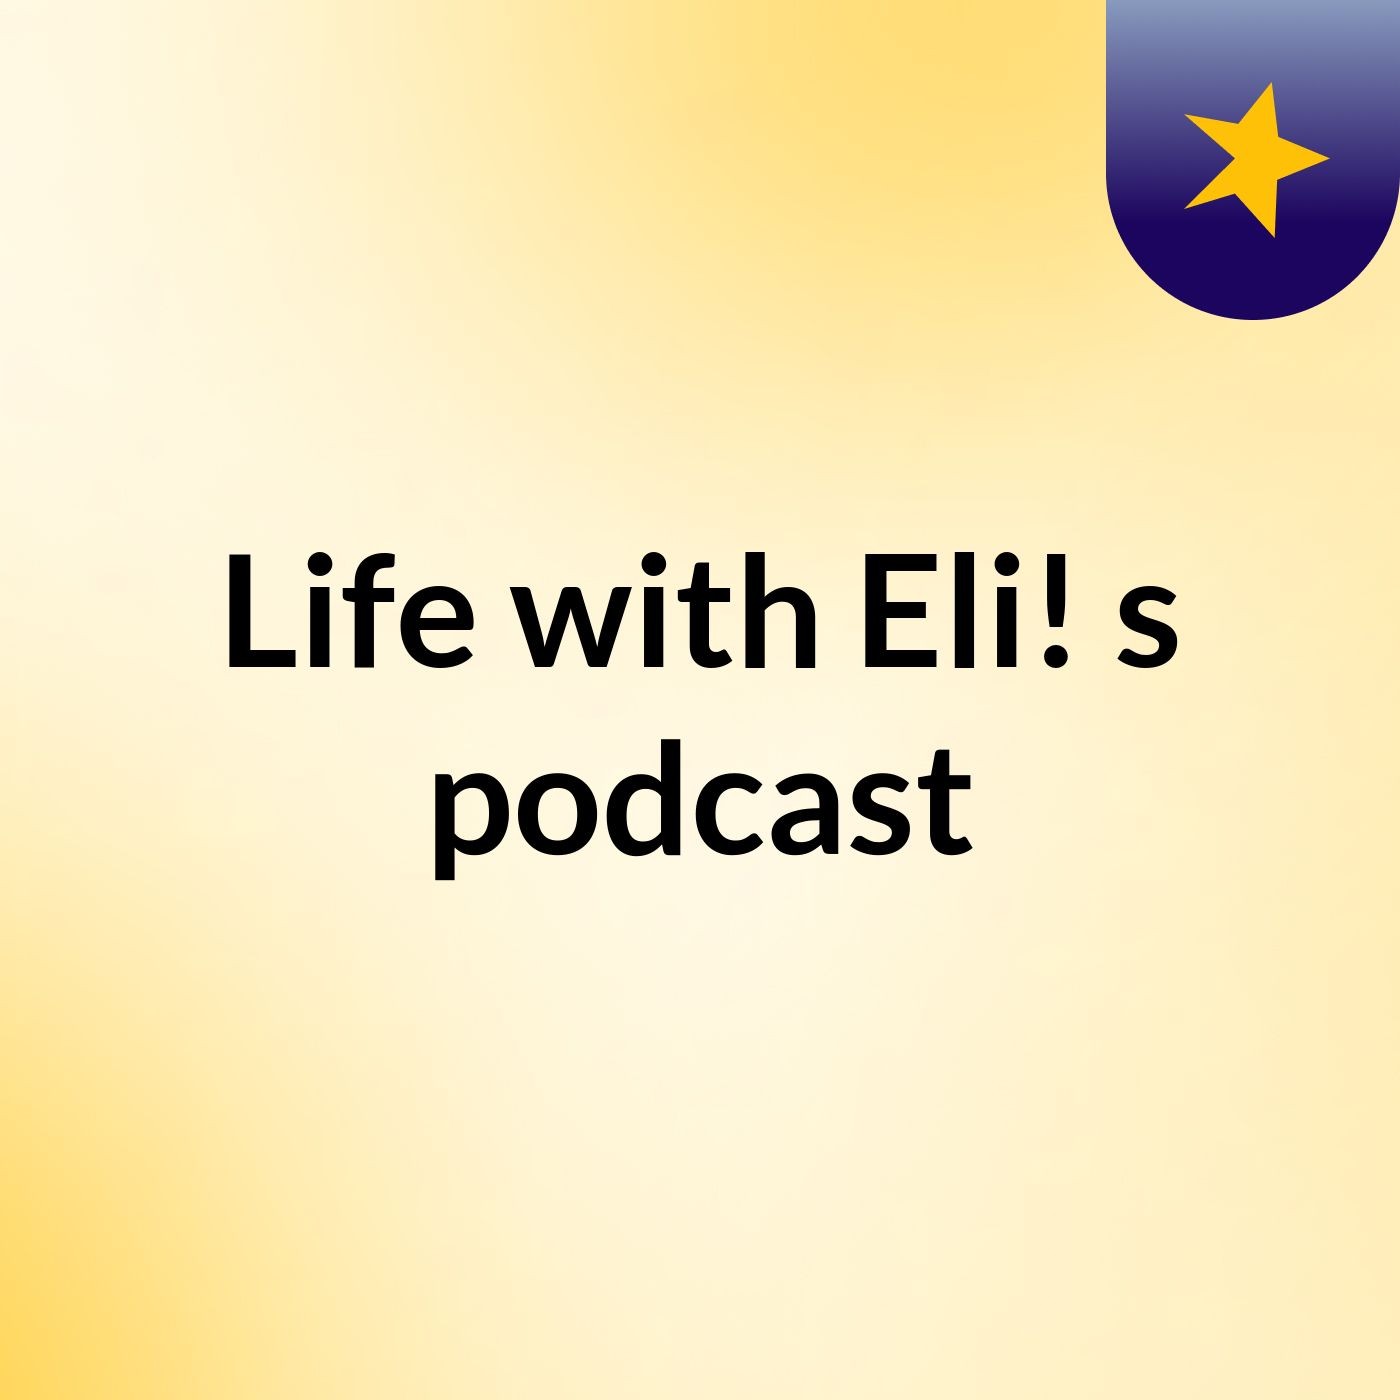 Episode 3 - Life with Eli!'s podcast